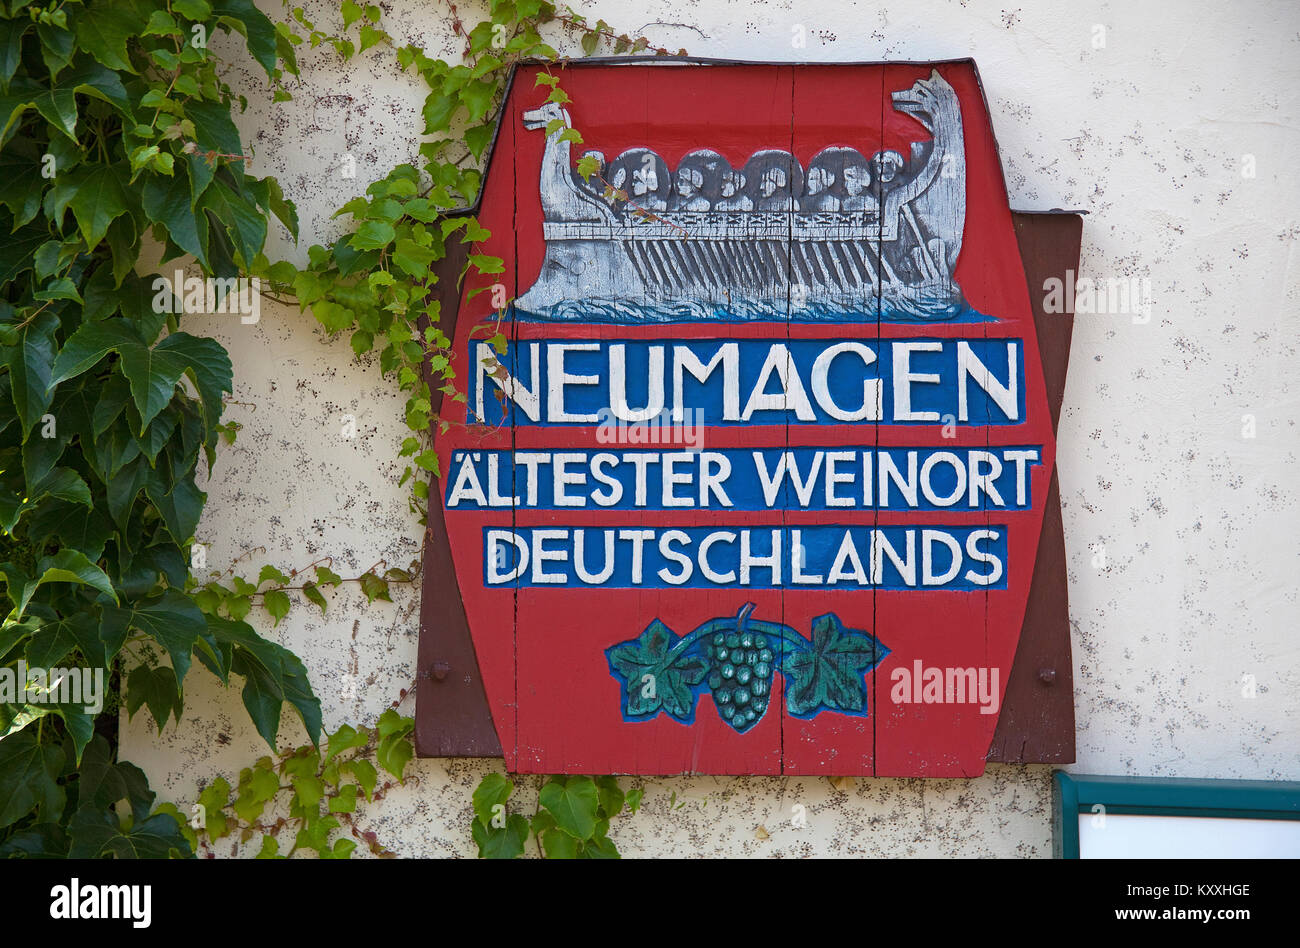 Label,logo at the village Neumagen-Dhron, Neumagen-Dhron is the oldest wine village of Germany, Moselle river, Rhineland-Palatinate, Germany, Europe Stock Photo